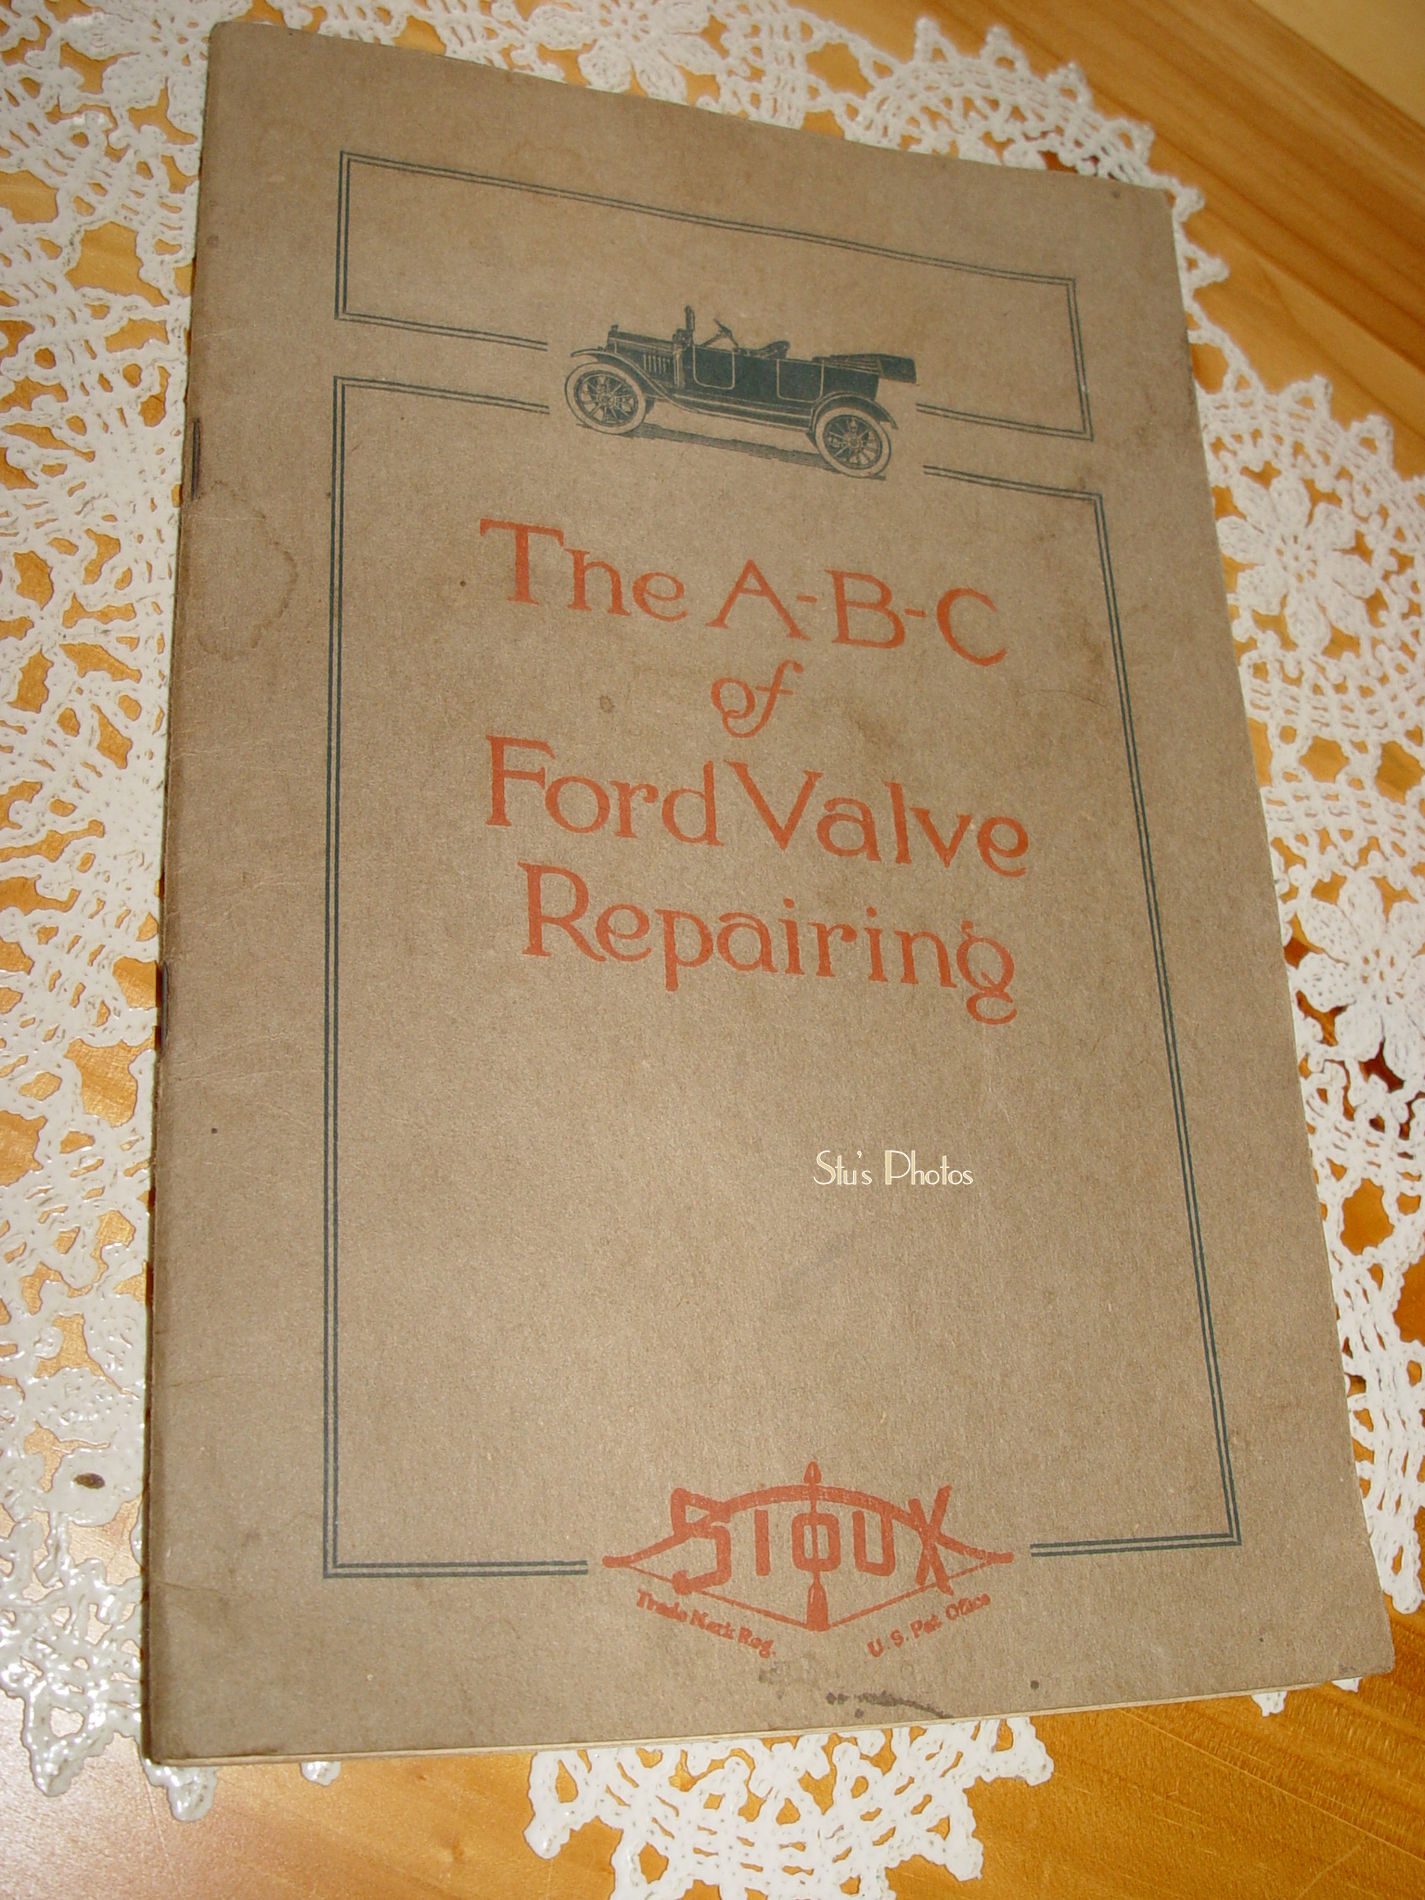 “Little Sioux”
                        The ABC of Ford Valve Repairing Auto Repair,
                        Tool Manual